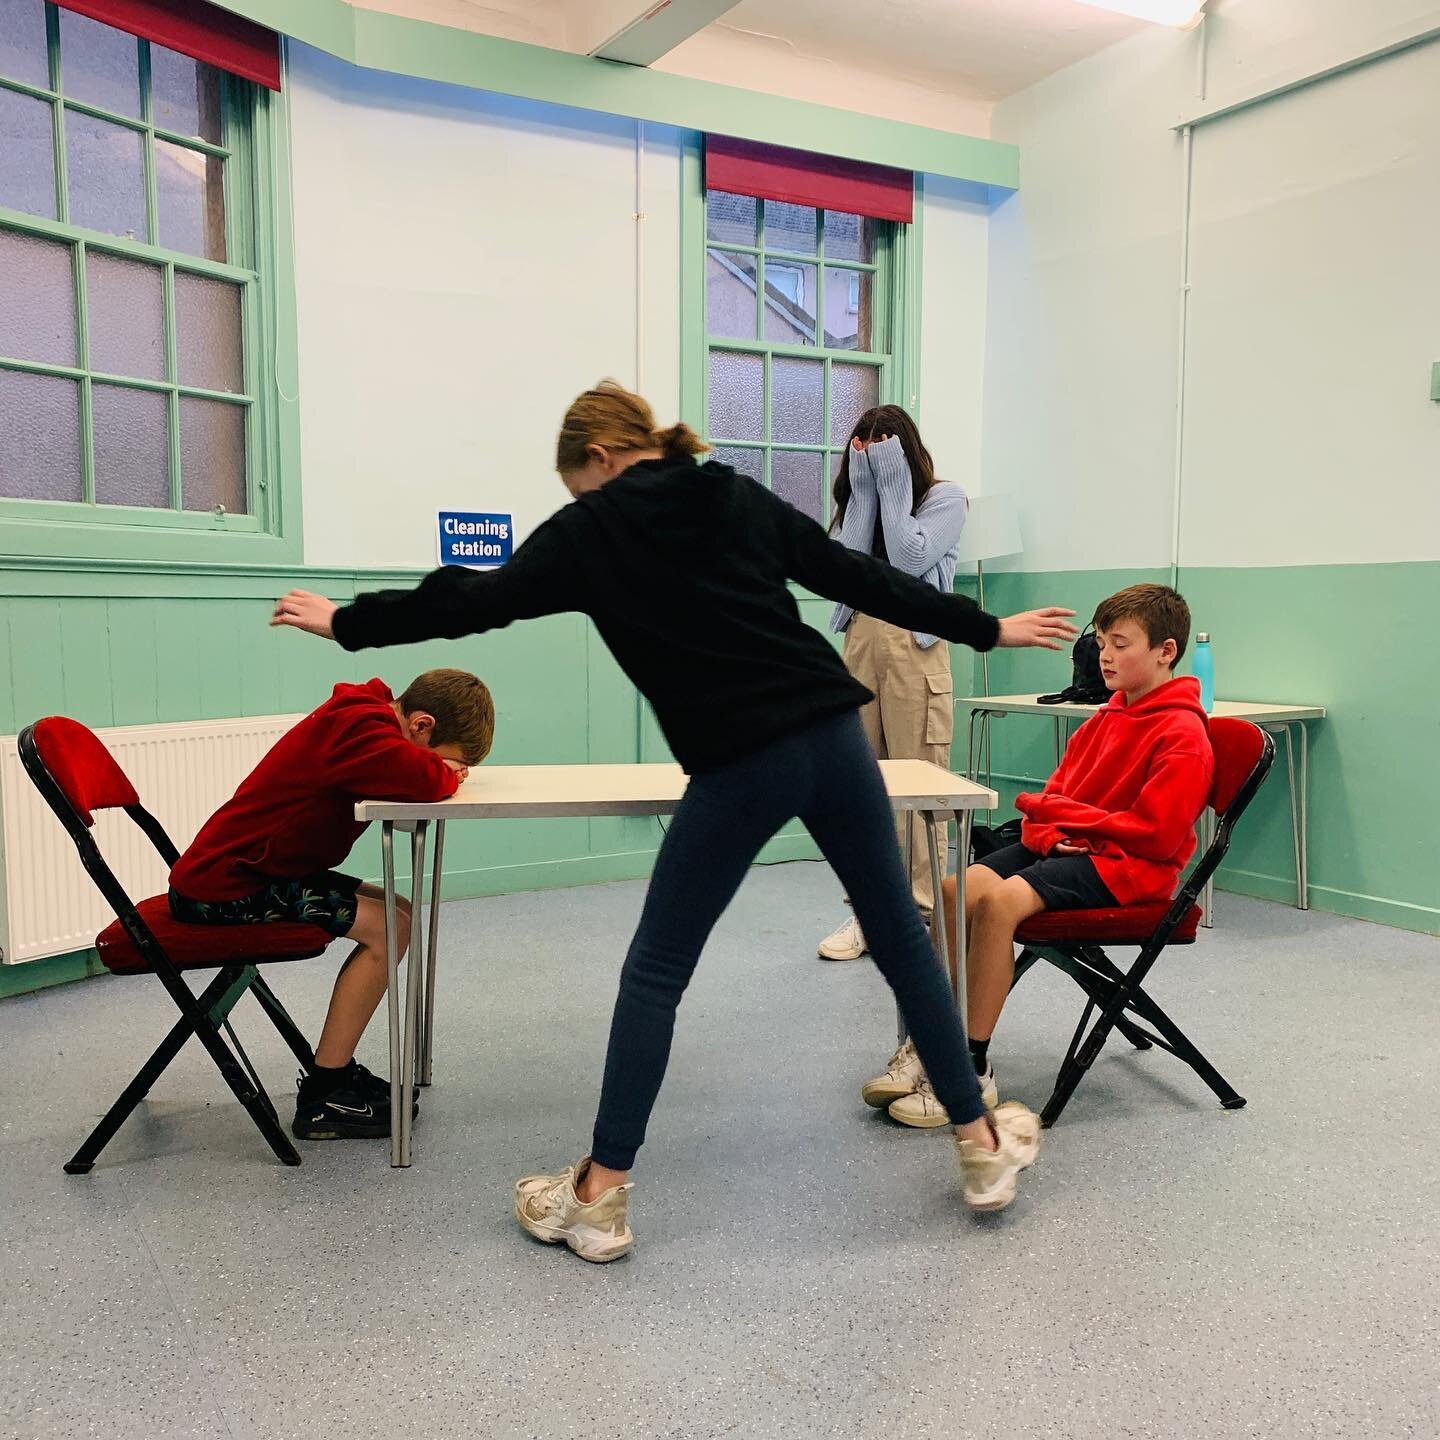 We had so much fun with our Portobello kids last week in our &lsquo;the restaurant&rsquo; improvisations, where lots of hilarious and unlikely situations arose 🤣😱👀&hellip; which of course had us all falling about laughing! So much fun 😆 

#dramac